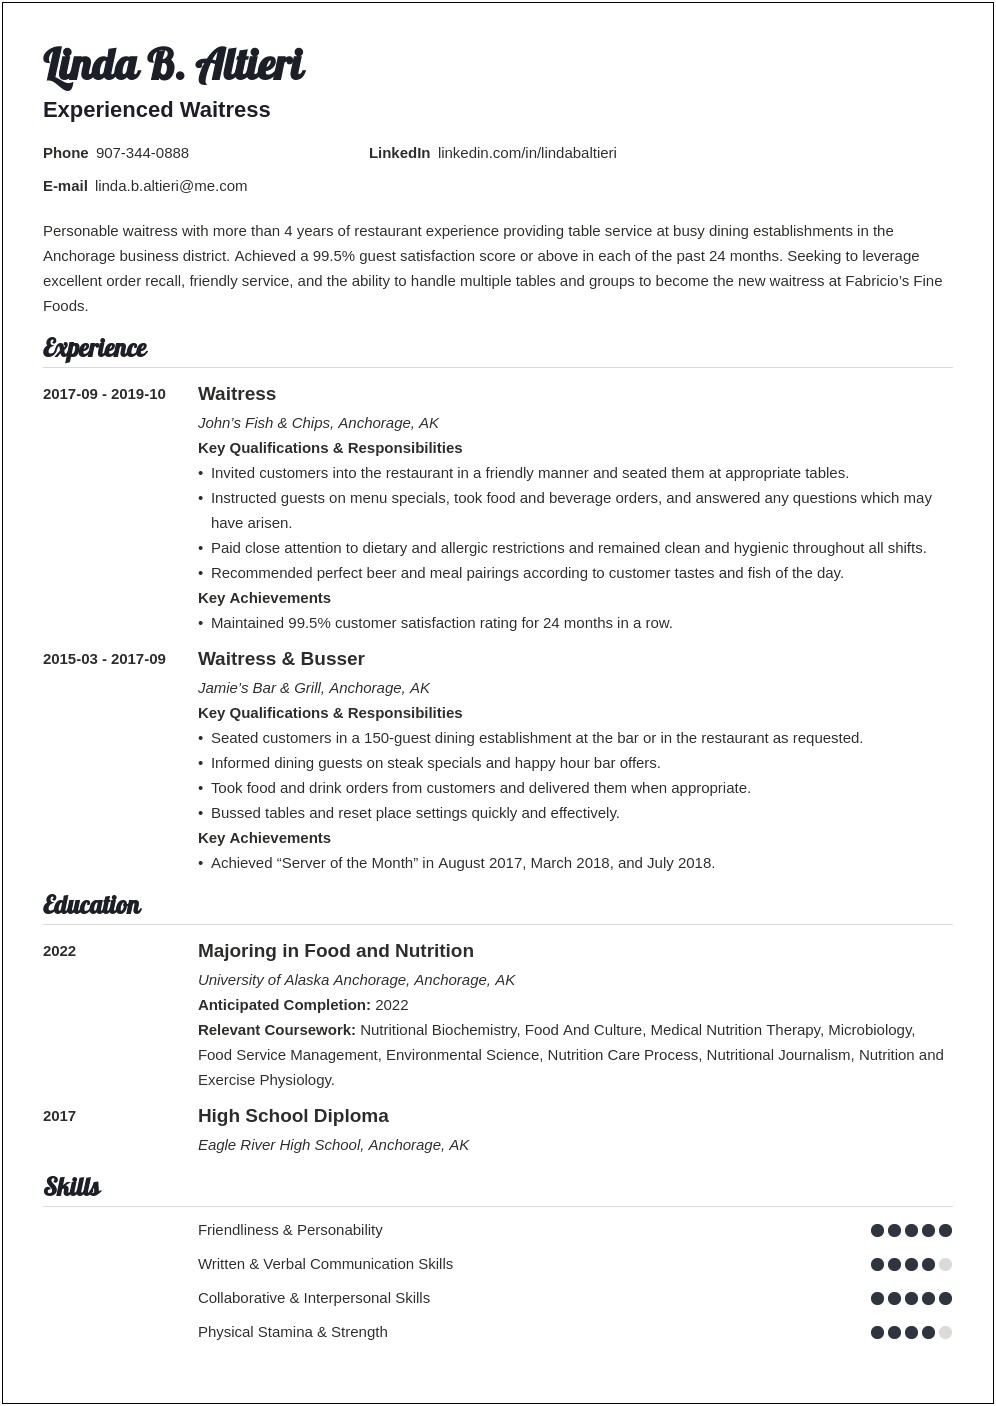 Sample Resume For Waitress Job With No Experience